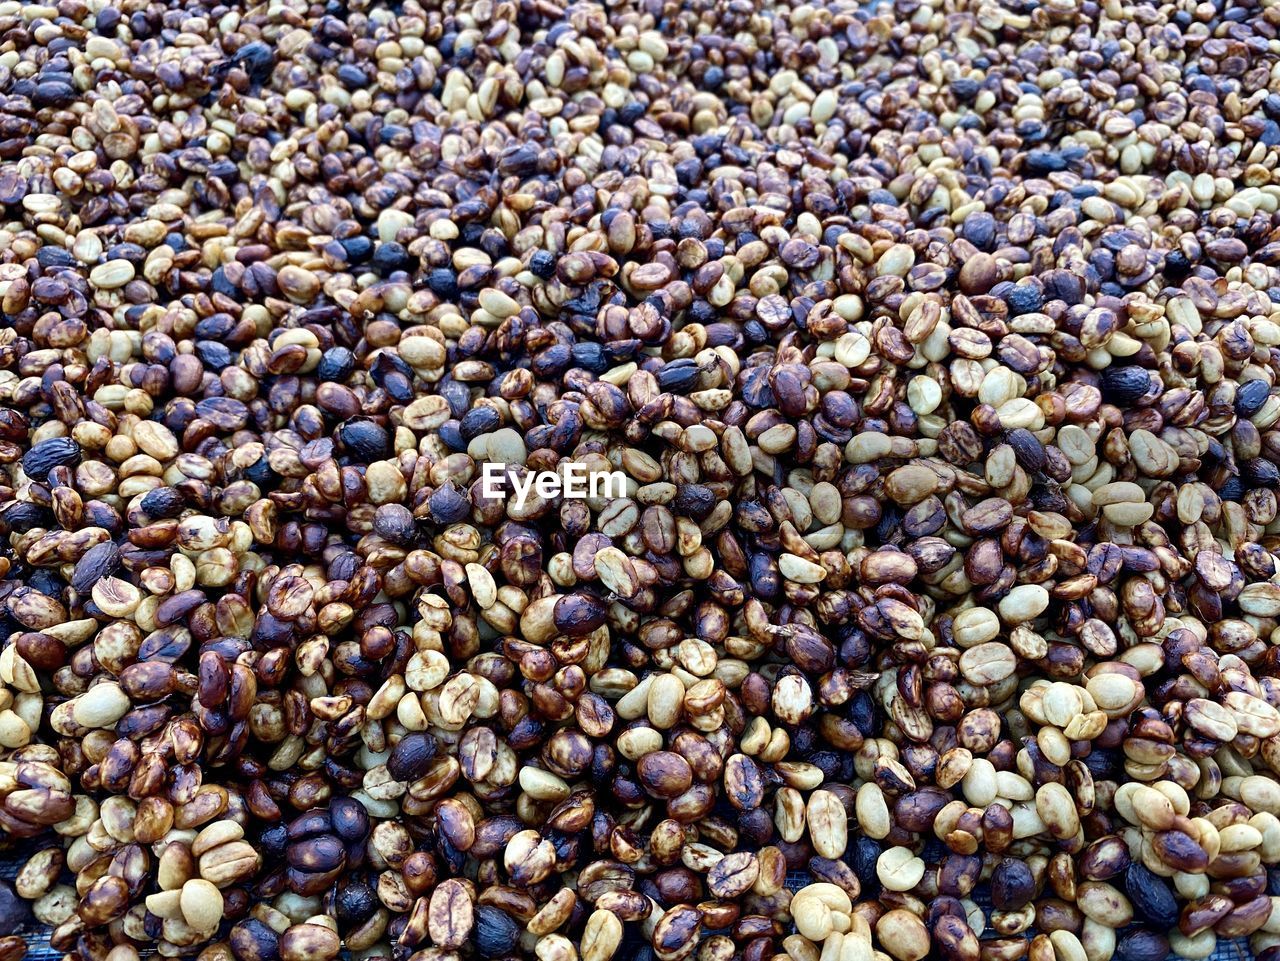 Organic coffee beans in northern thailand